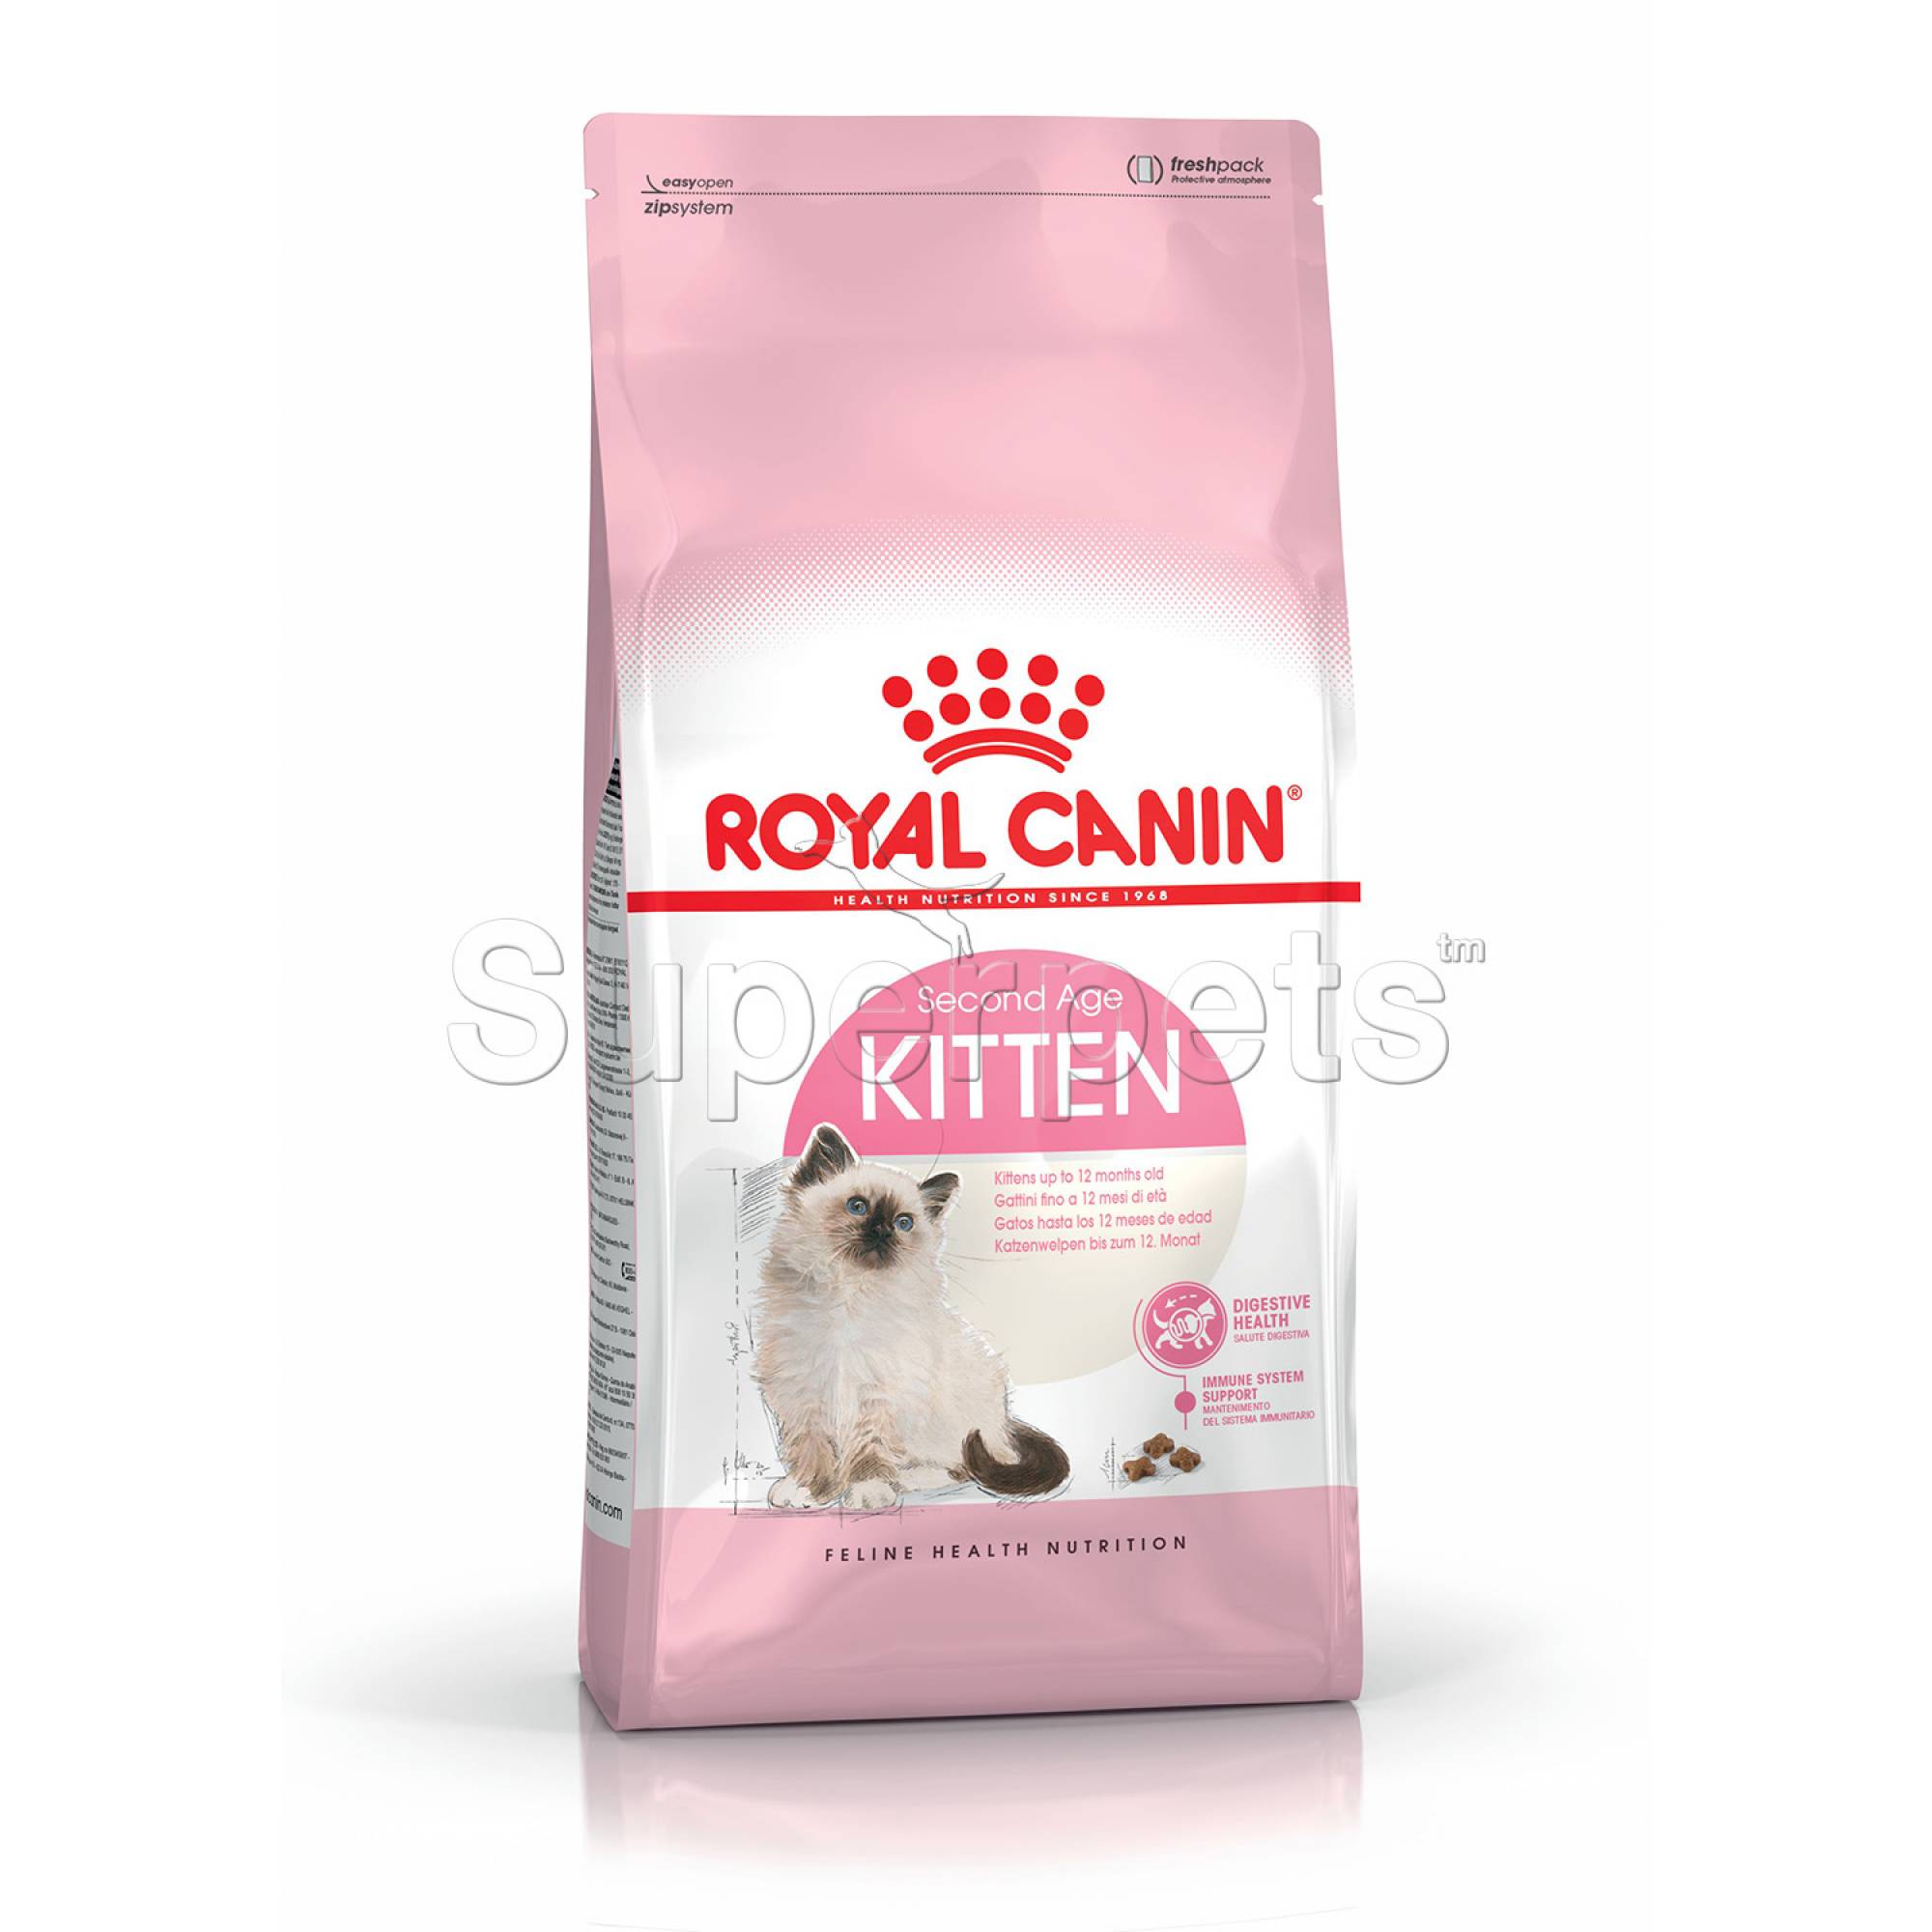 Royal Canin - Cat - Second Age Kitten 400g